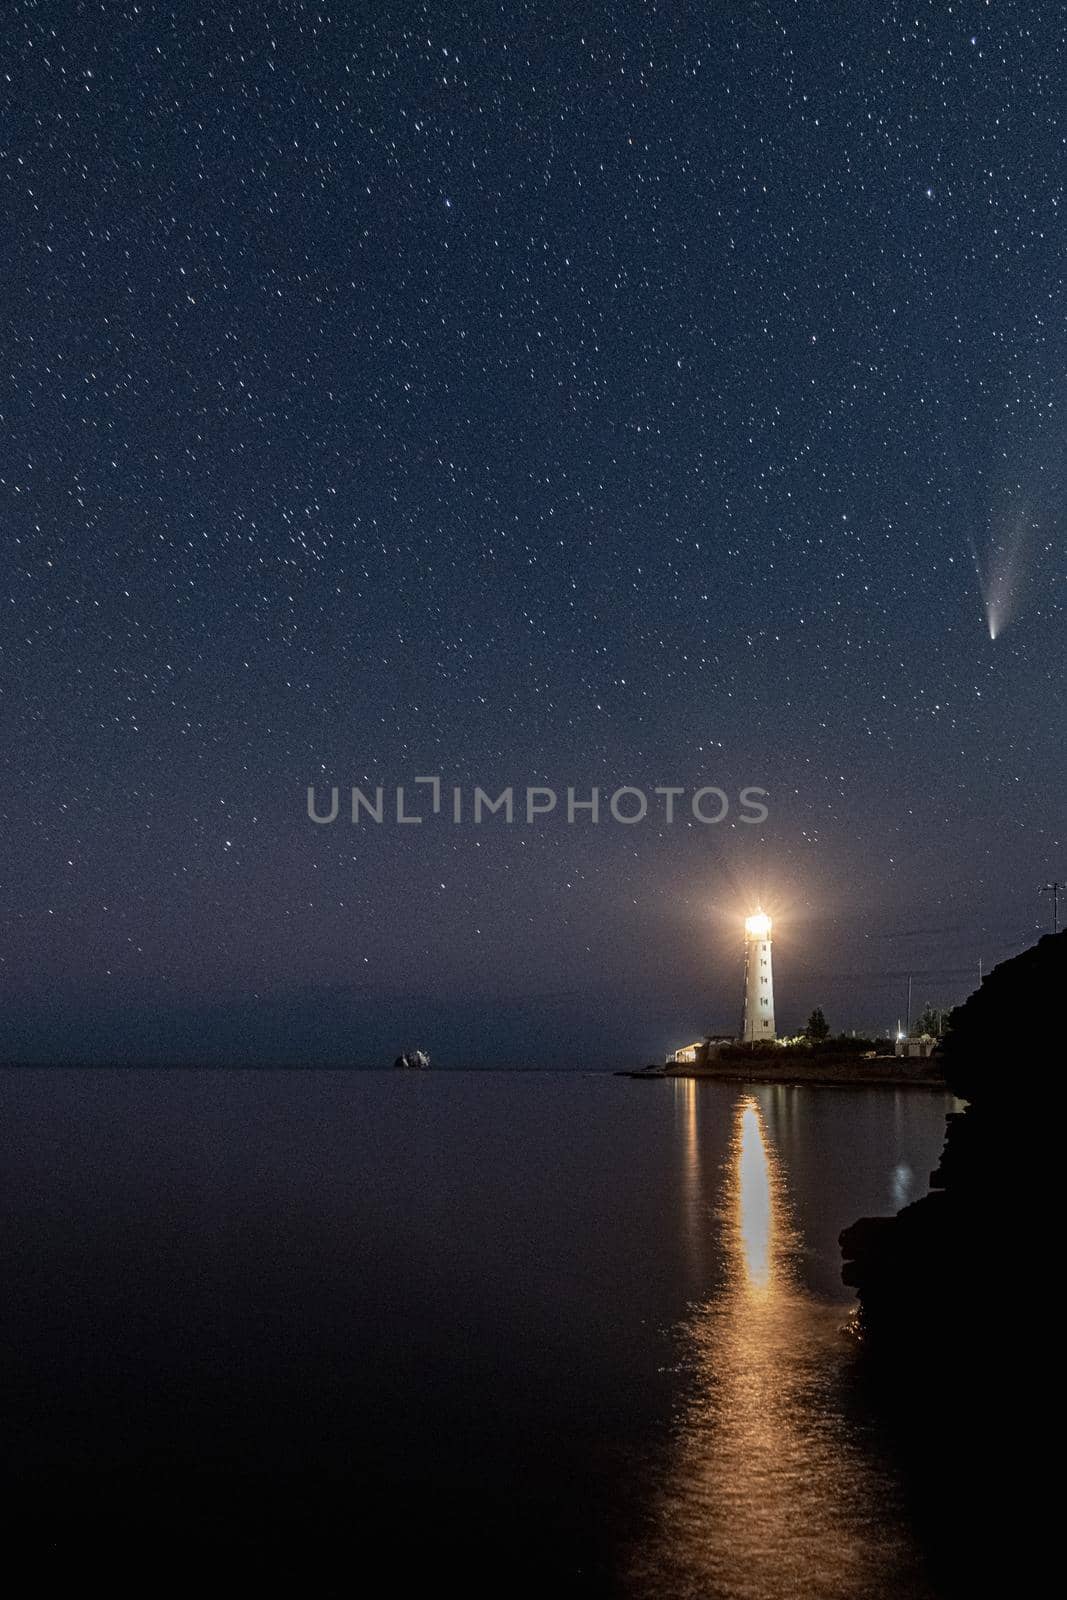 Panoramic HDR Landscape view of Neowise comet over white Lighthouse at night sky by MKolesnikov